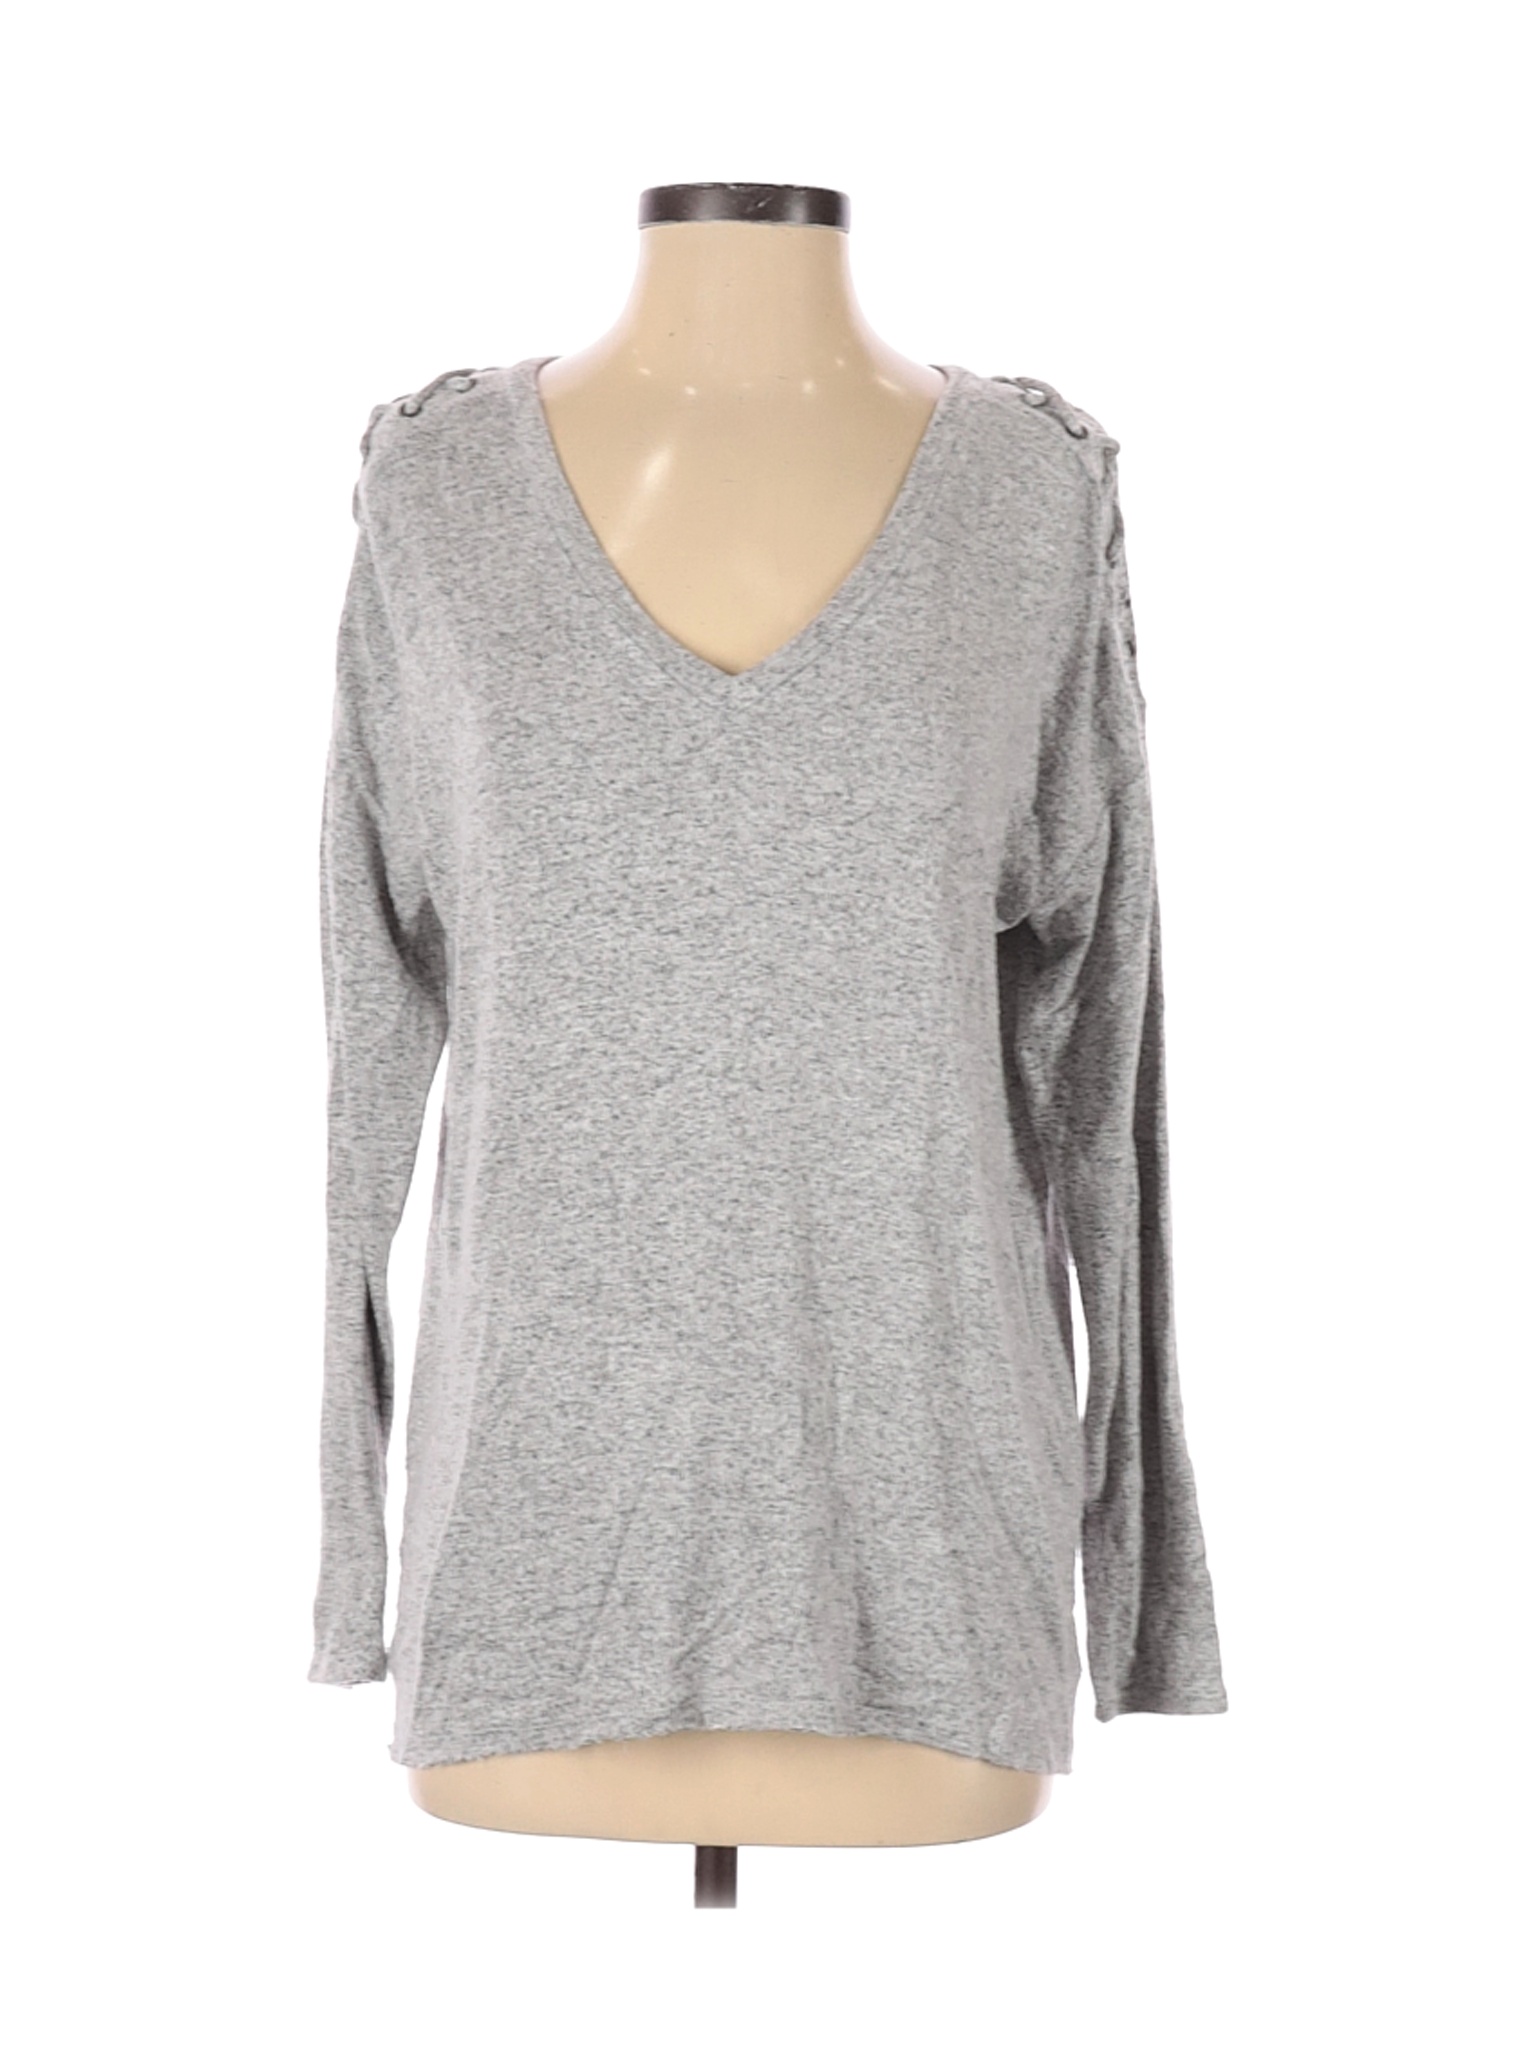 American Eagle Outfitters Women Gray Pullover Sweater S | eBay